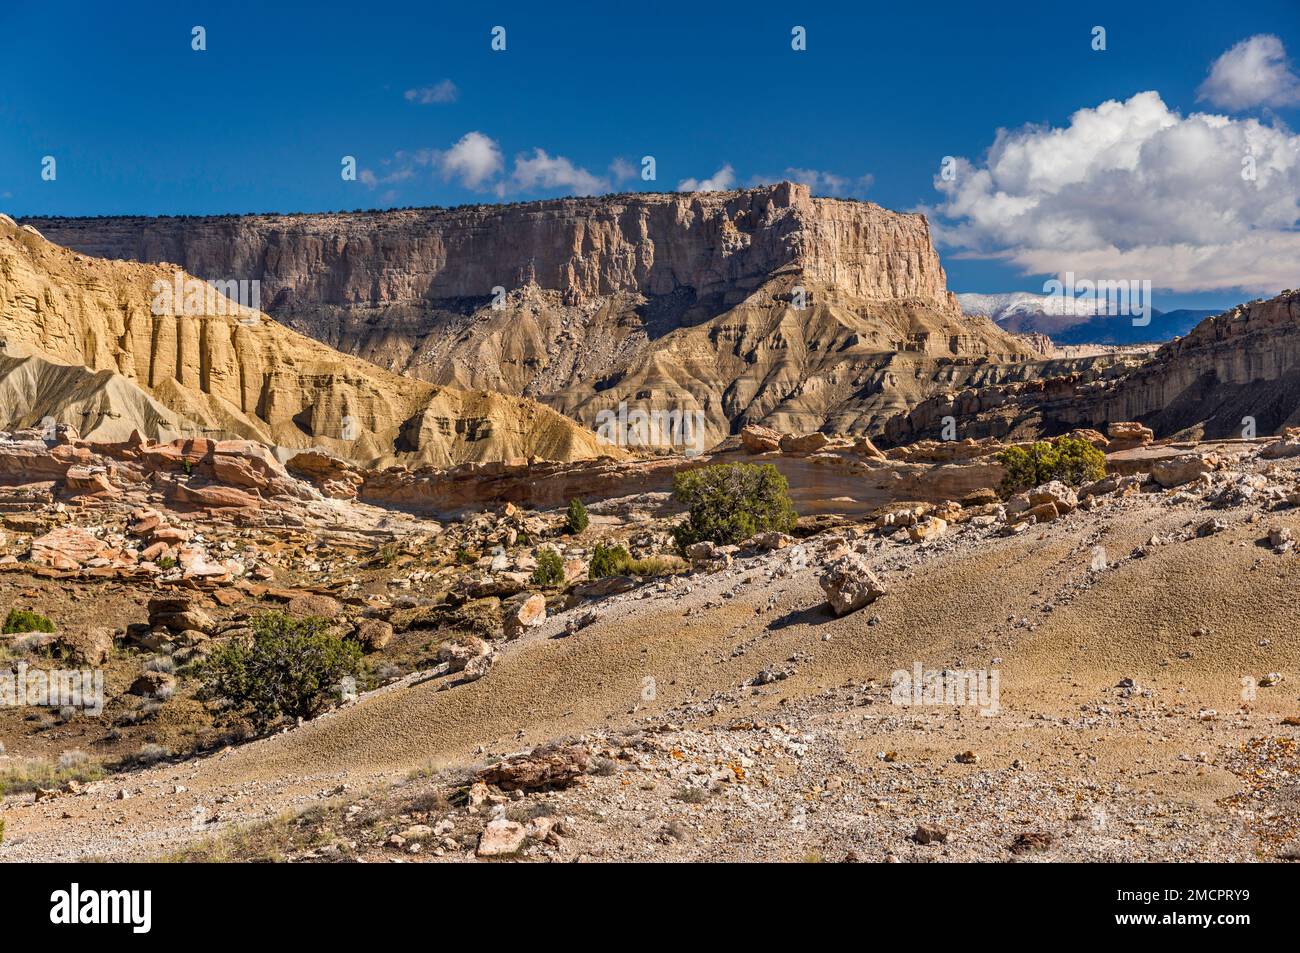 Oyster Shell Reef, Swap Mesa, Henry Mountains in far distance, view from Notom Bullfrog Road, Capitol Reef National Park, Utah, USA Stock Photo